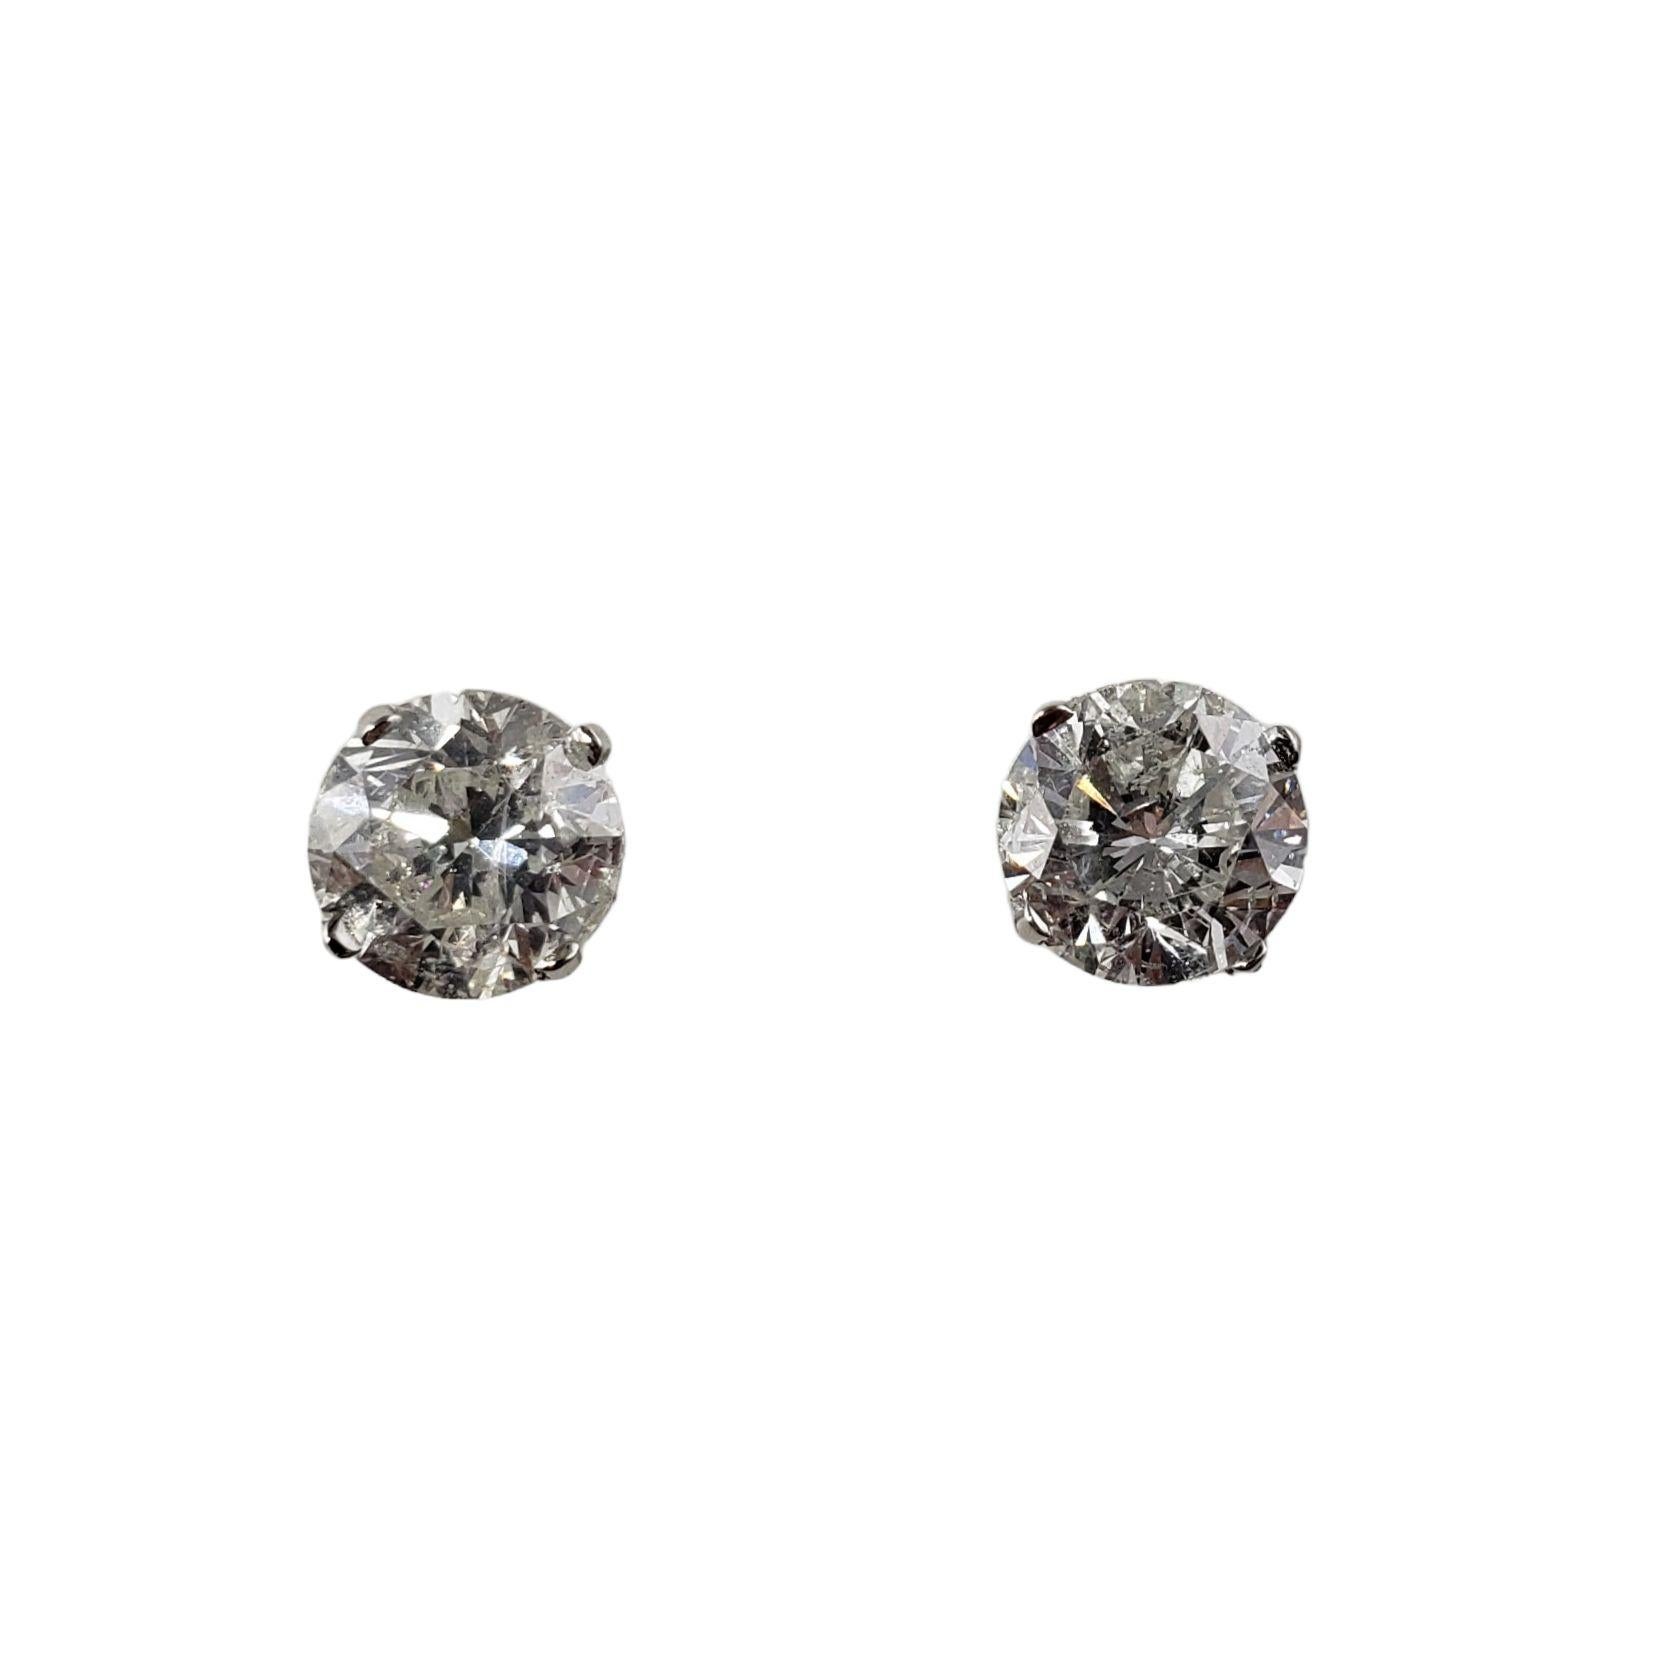 Vintage 14 Karat White Gold Diamond Stud Earrings JAGi Certified-

These sparkling earrings each feature one laser drilled & fracture filled round brilliant cut diamond set in classic 14K white gold. Screw back closures.

Total diamond weight: 1.76